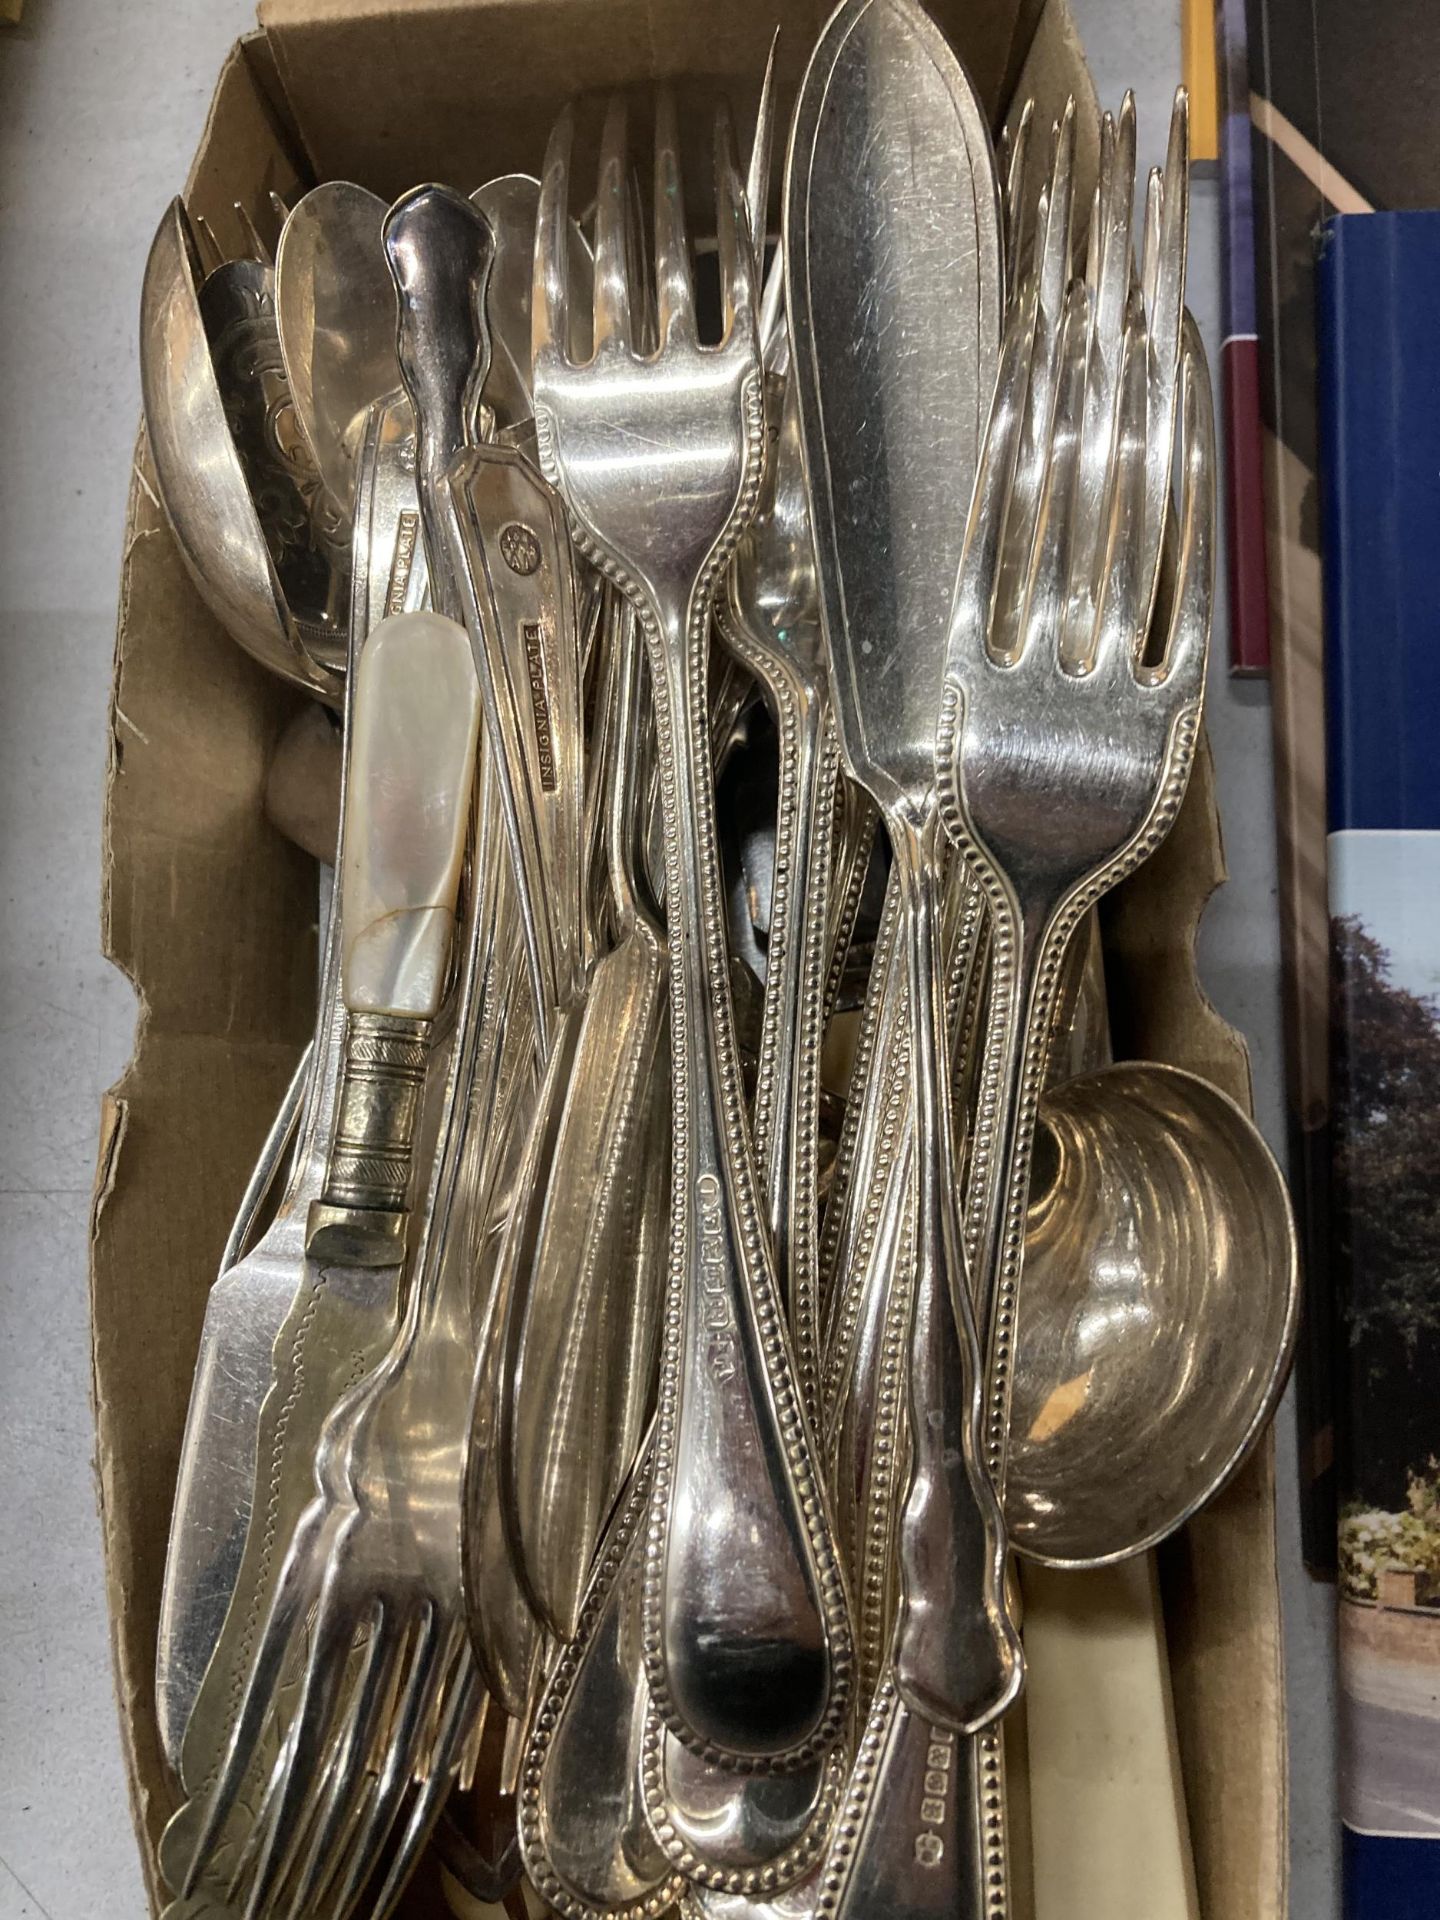 A LARGE QUANTITY OF FLATWARE - Image 2 of 4